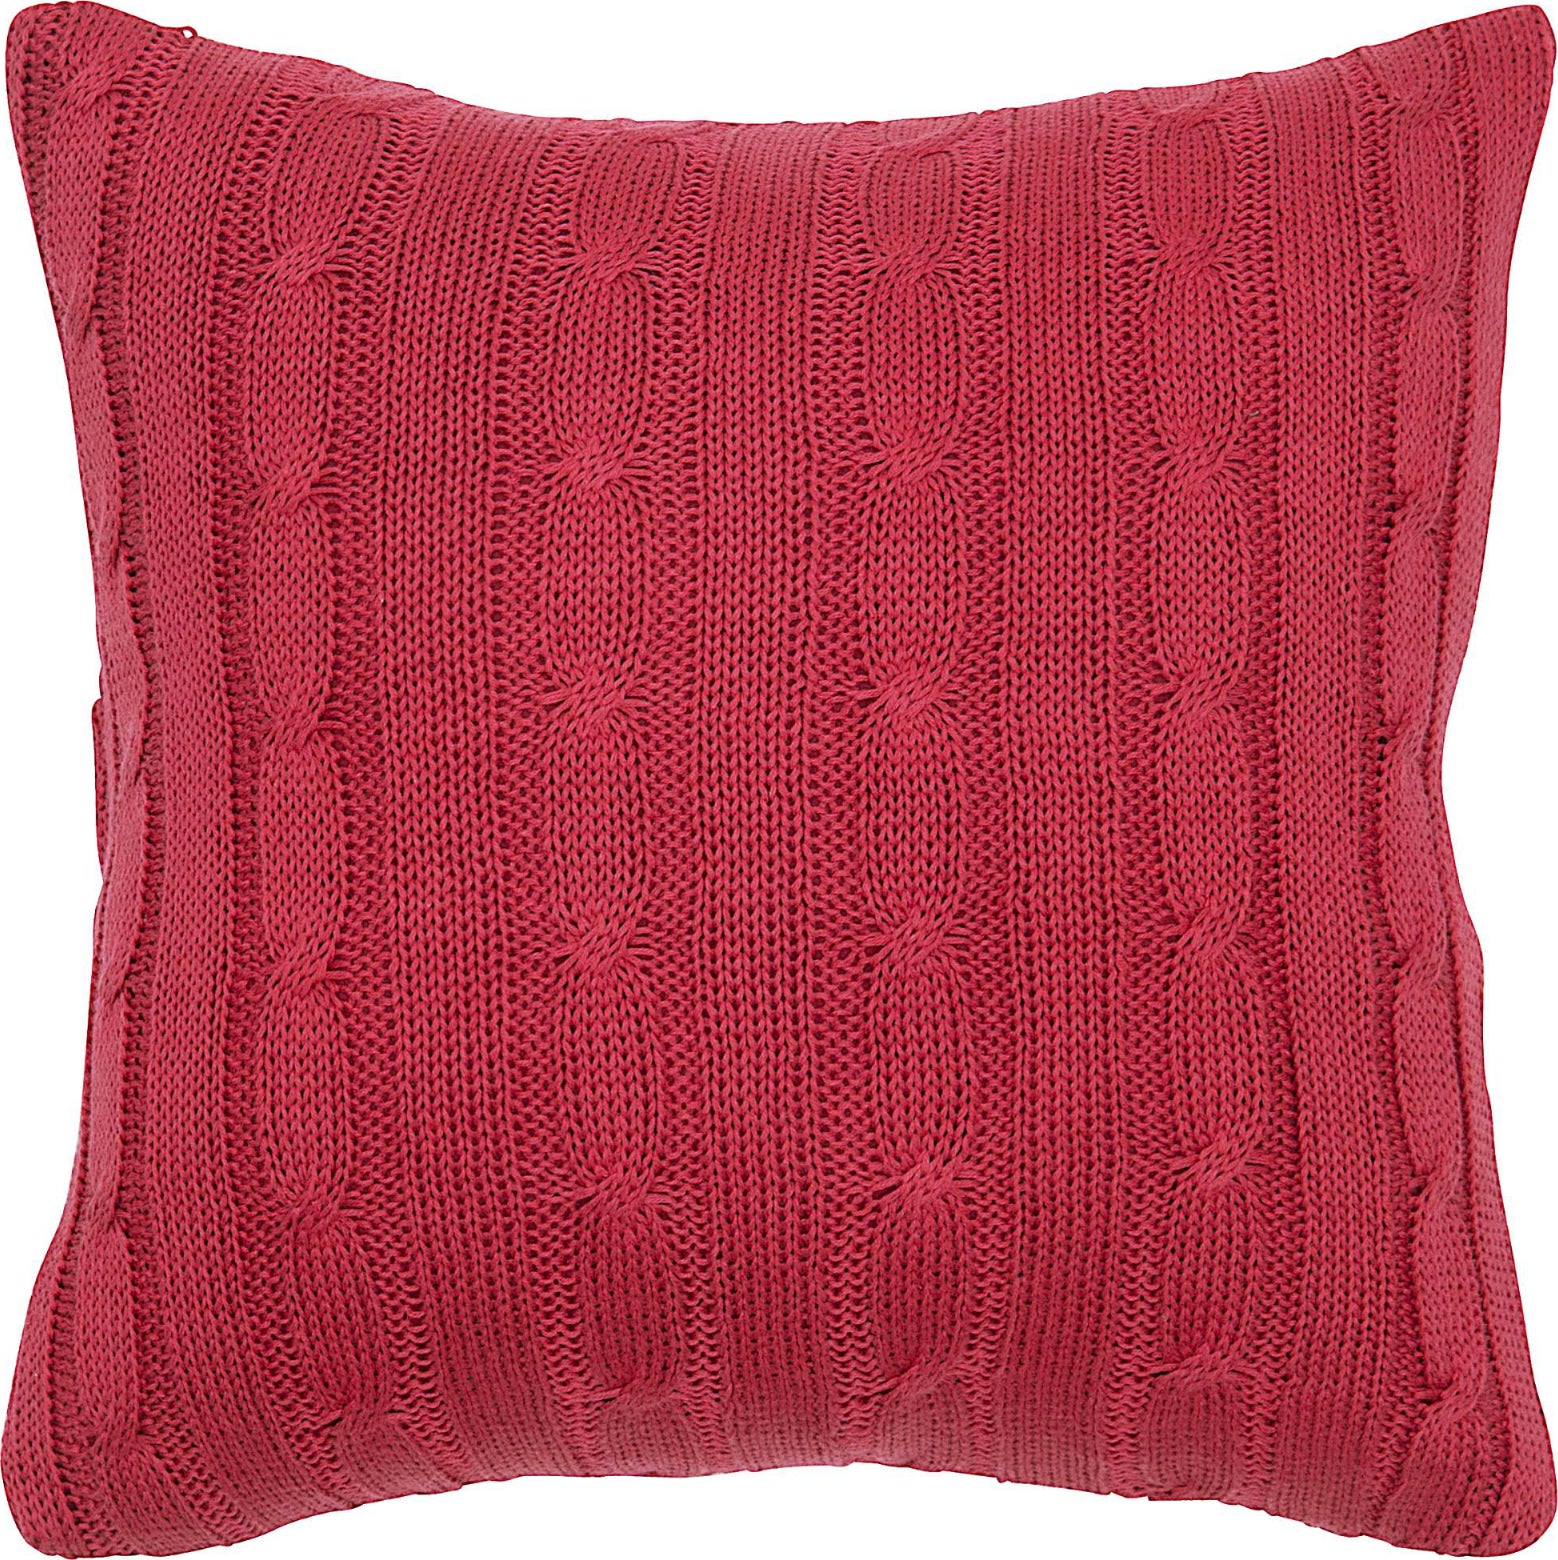 Rizzy Pillows T04980 Red